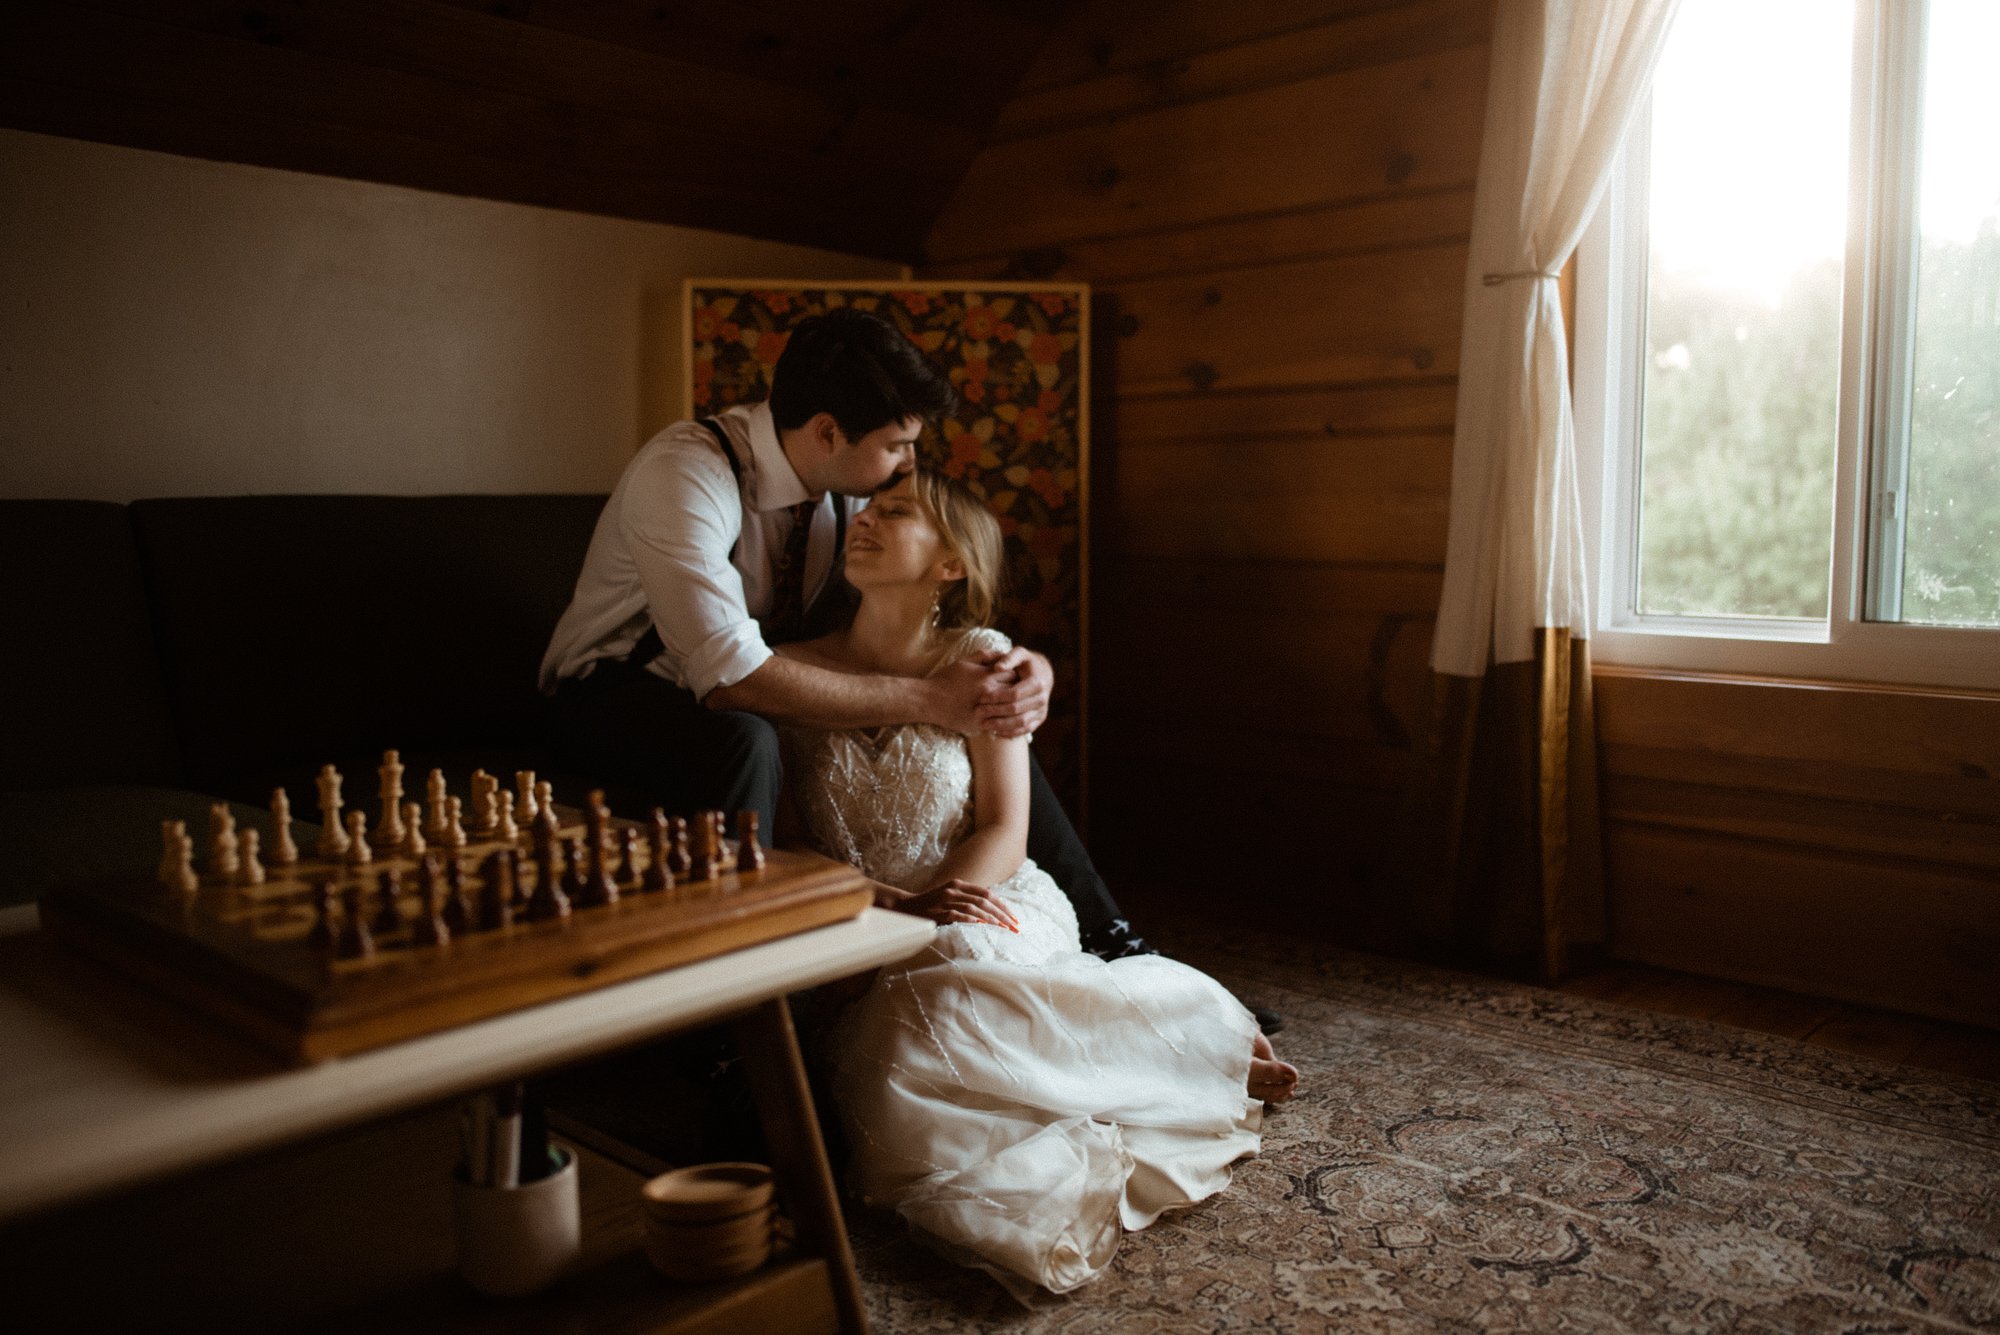 Sill and Glade Cabin Elopement in Virginia - Mountain Airbnb Elopement - White Sails Creative - Blue Ridge Mountains Elopement Cabin Inspiration_34.jpg